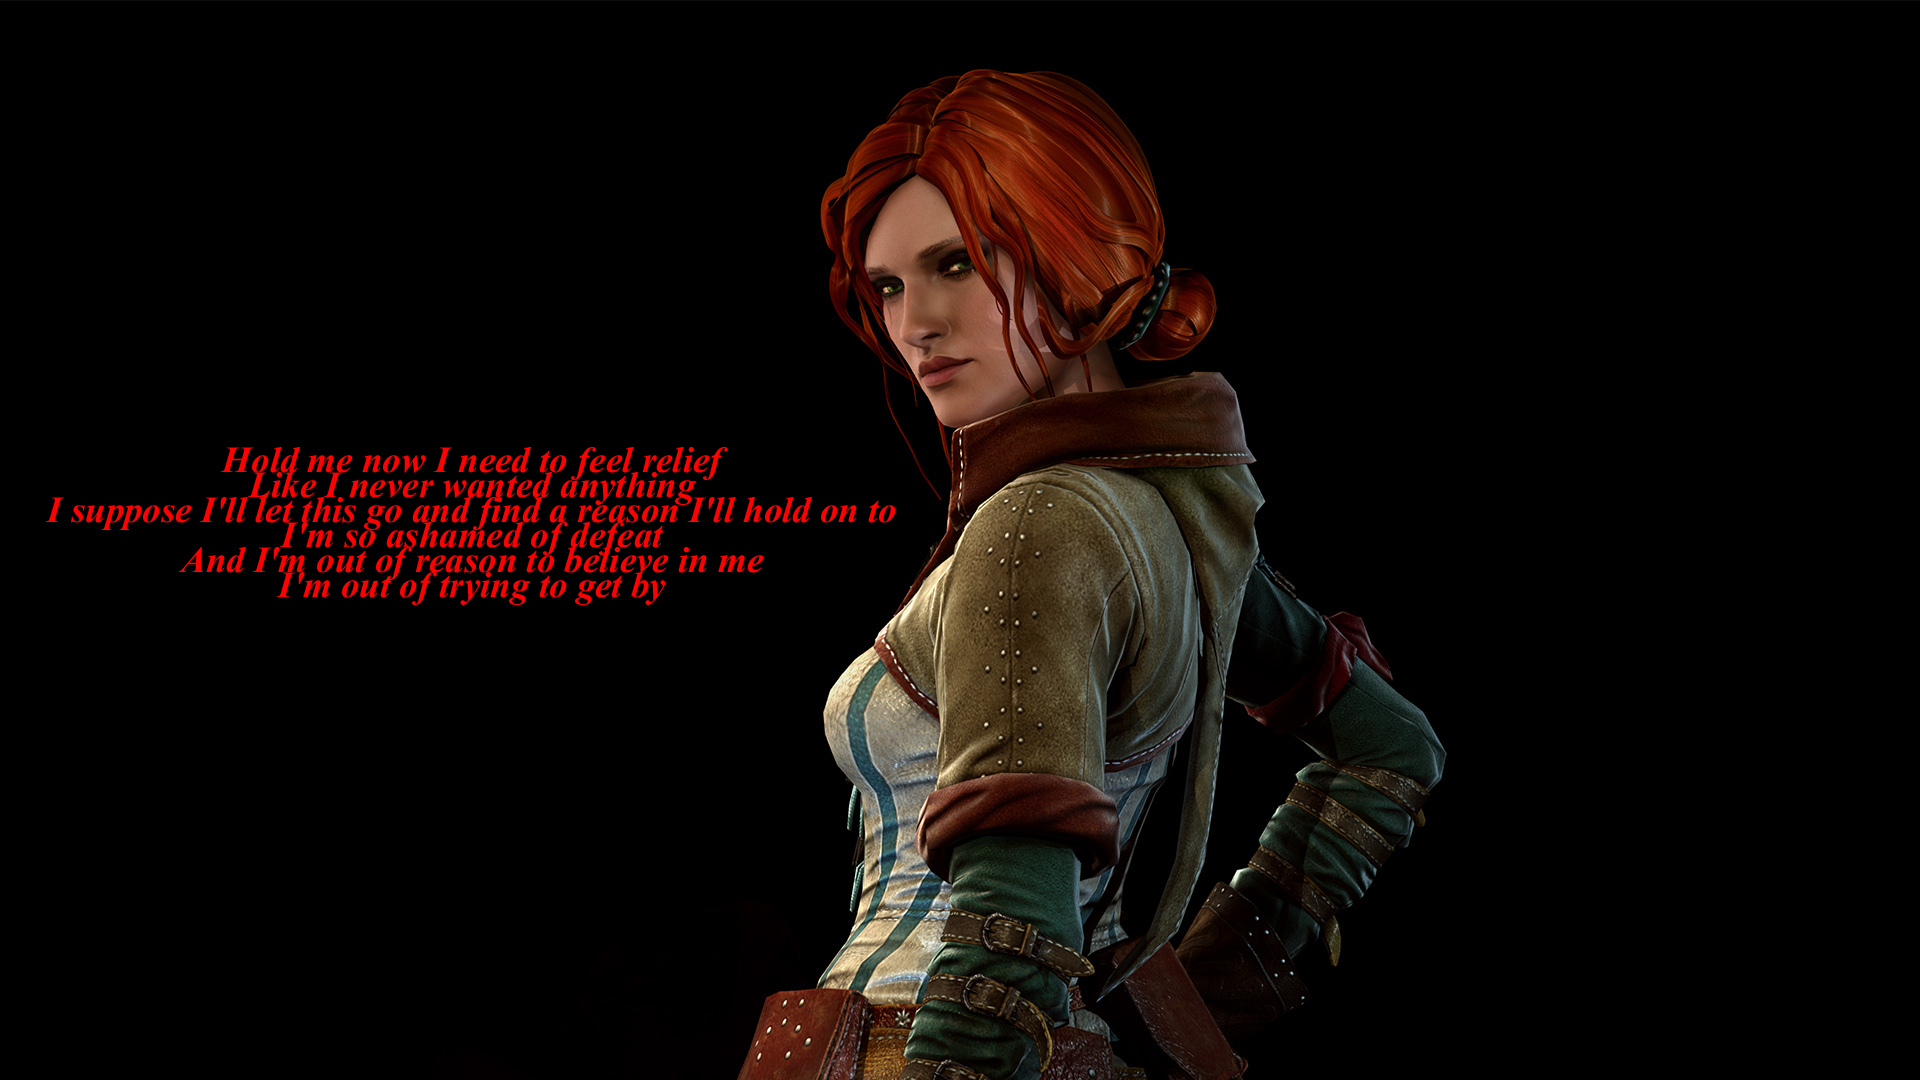 video game, the witcher 3: wild hunt, triss merigold, the witcher